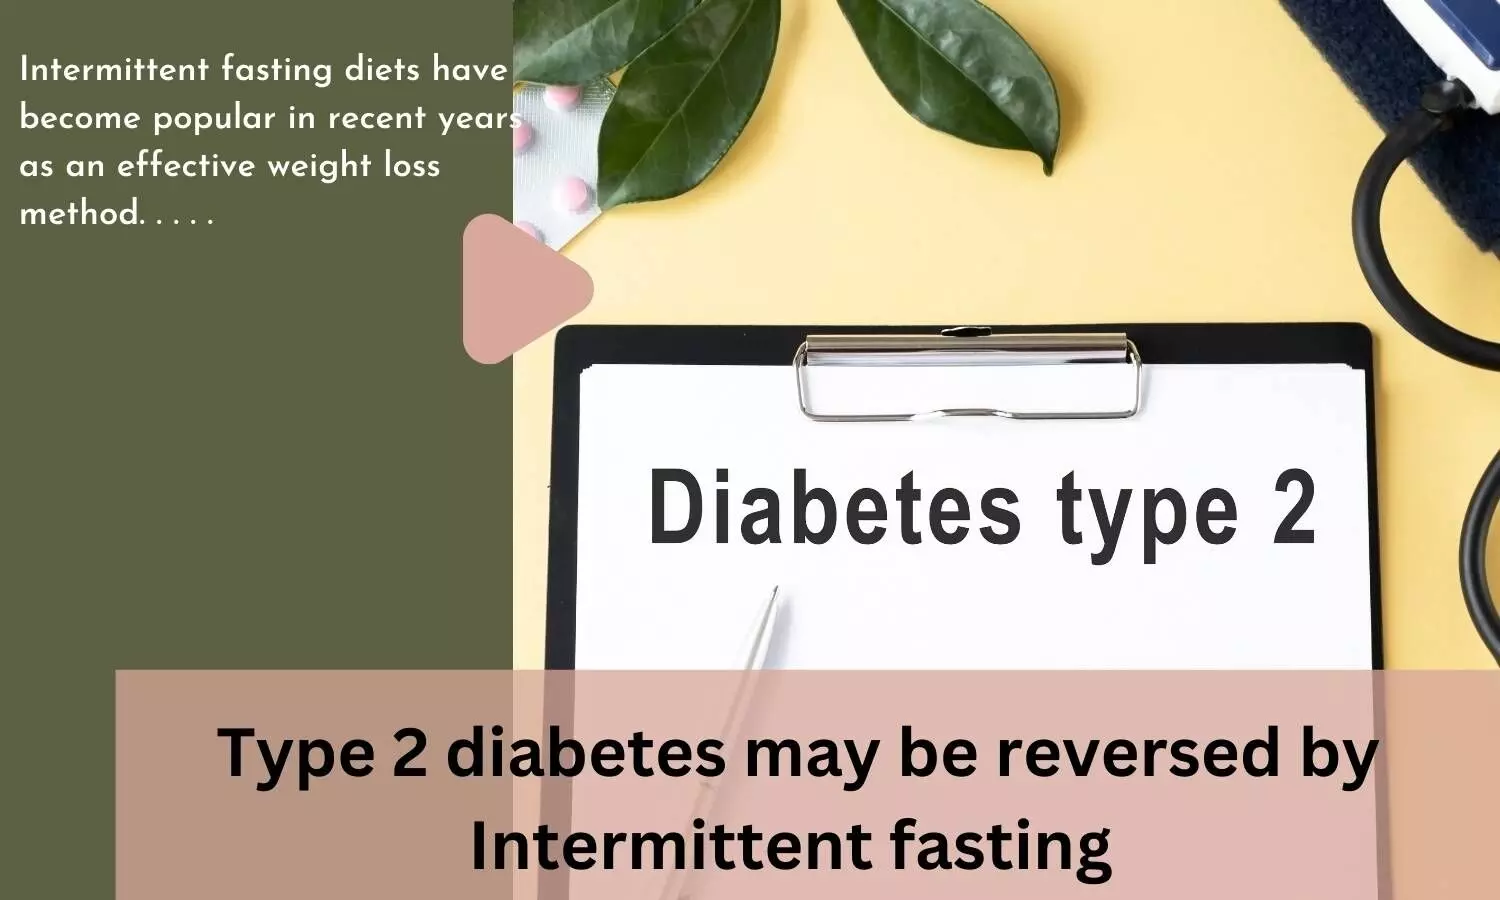 Type 2 diabetes may be reversed by Intermittent fasting